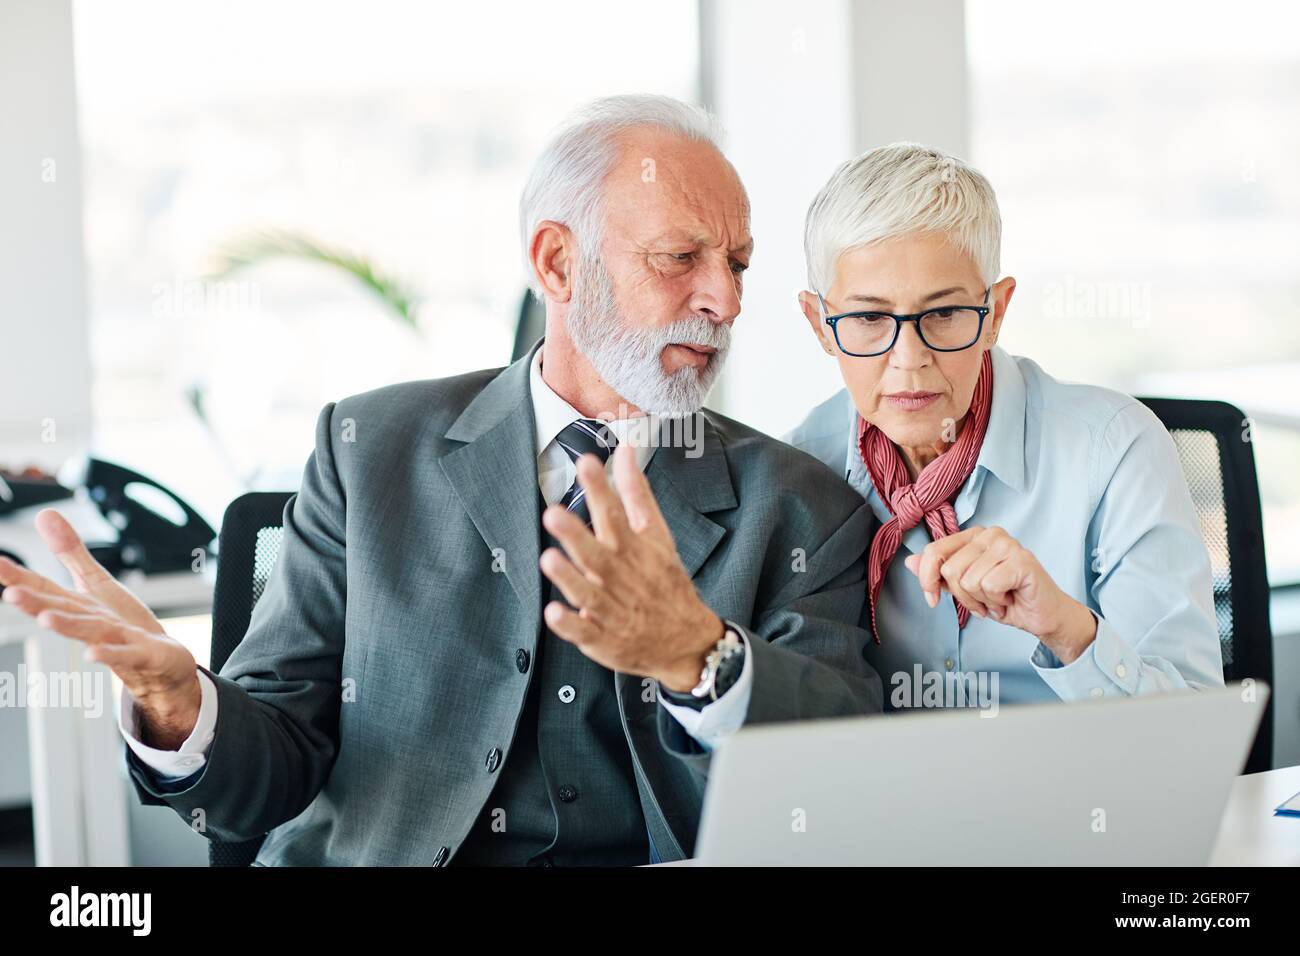 business office person discussion laptop problem worried teamwork senior meeting Stock Photo